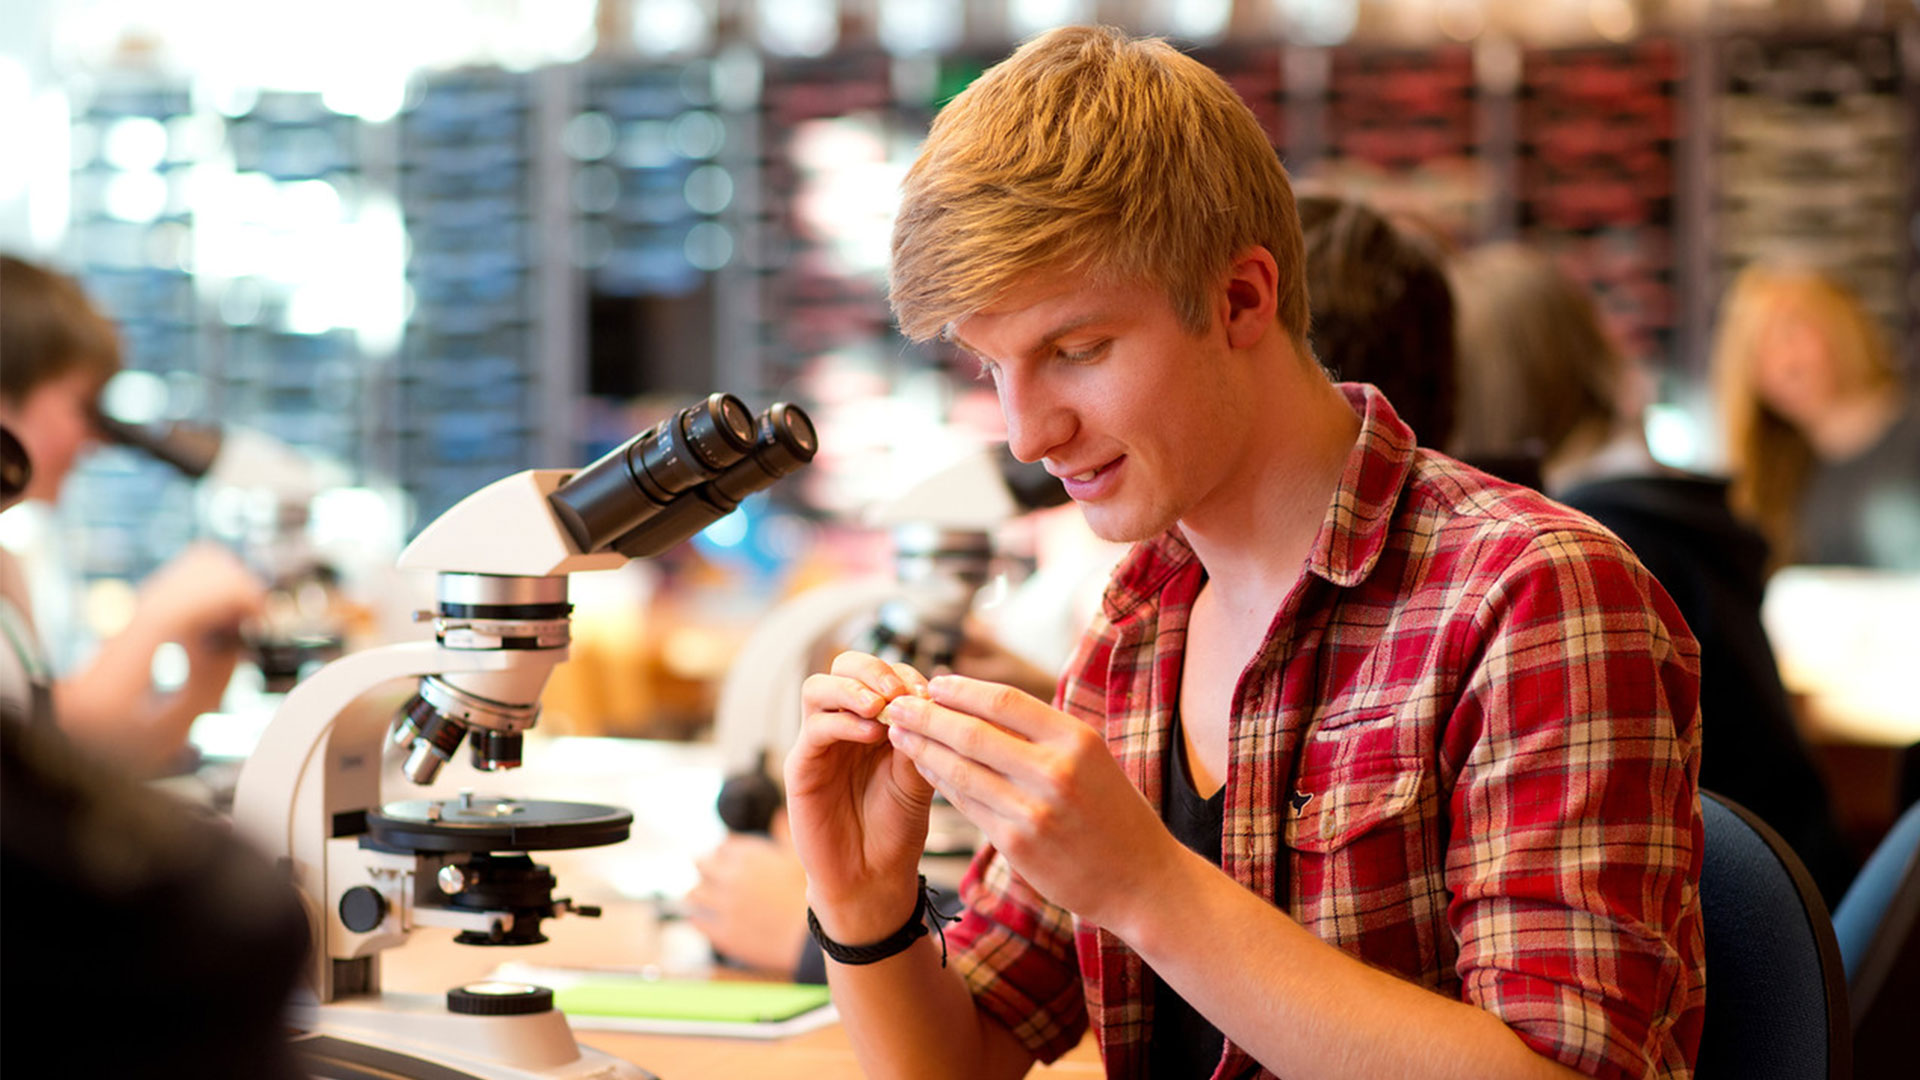 A student with a microscope, studying something in his hand